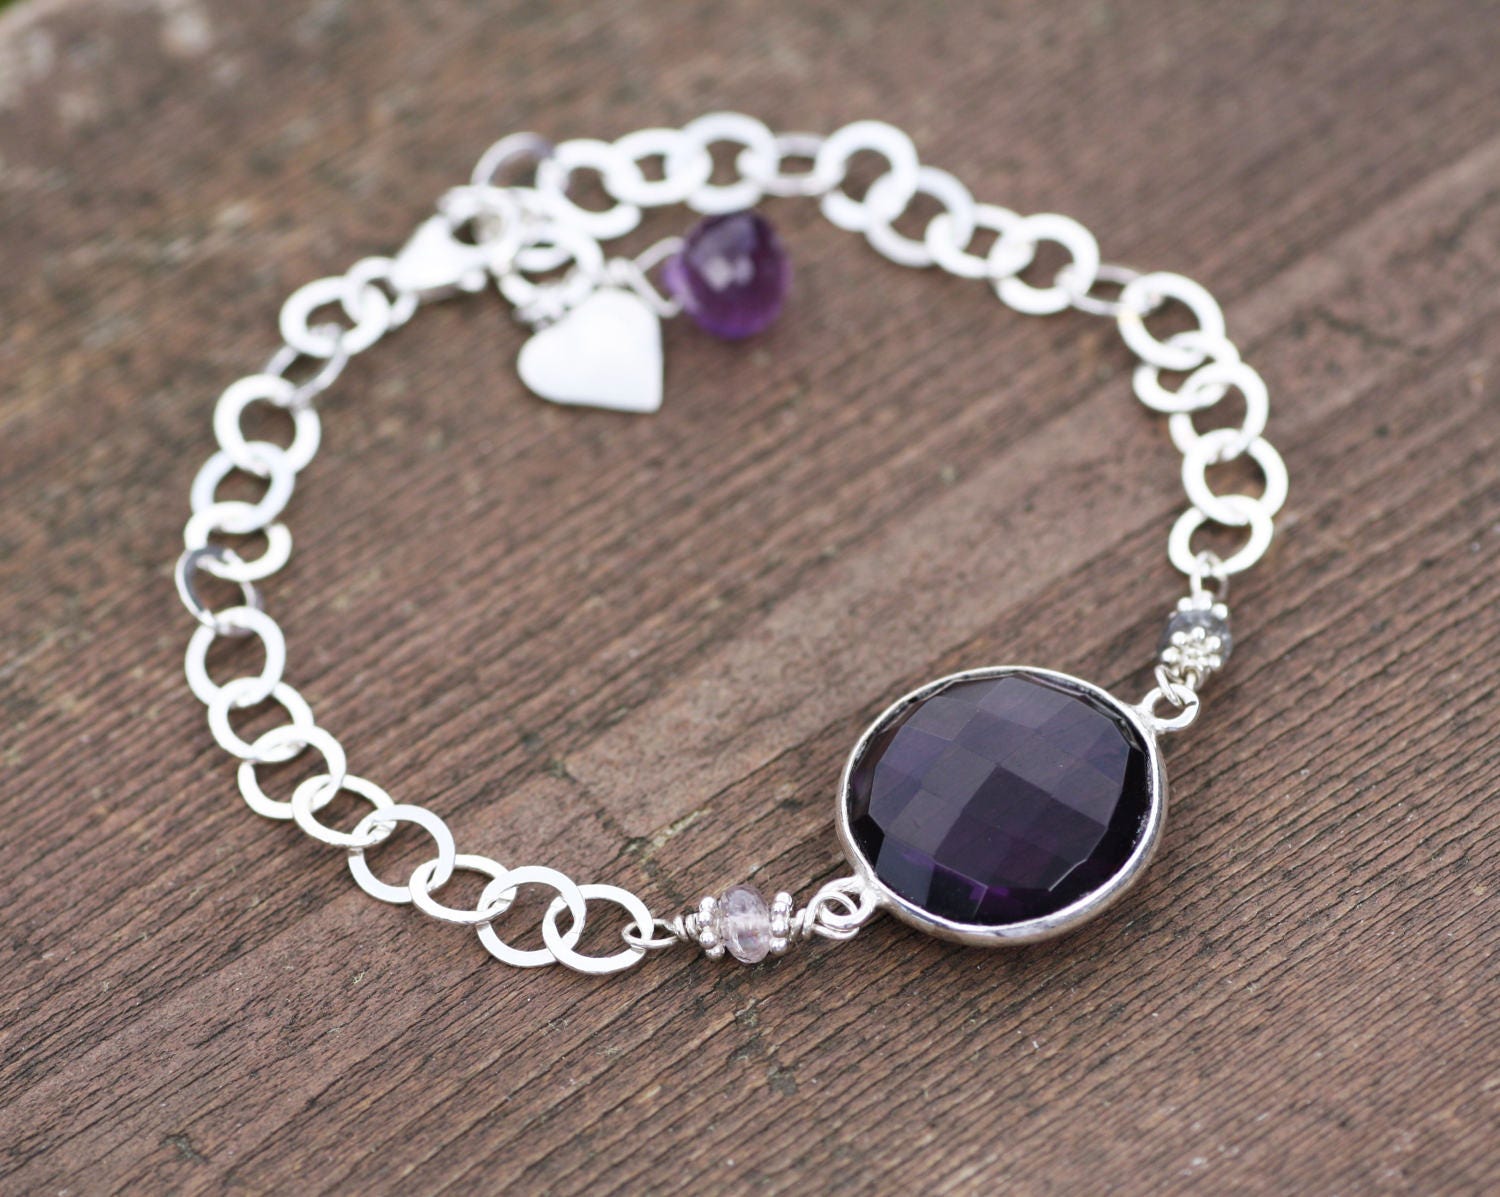 Natural Spinel and Amethyst Bracelet in Sterling Silver Charm | Etsy